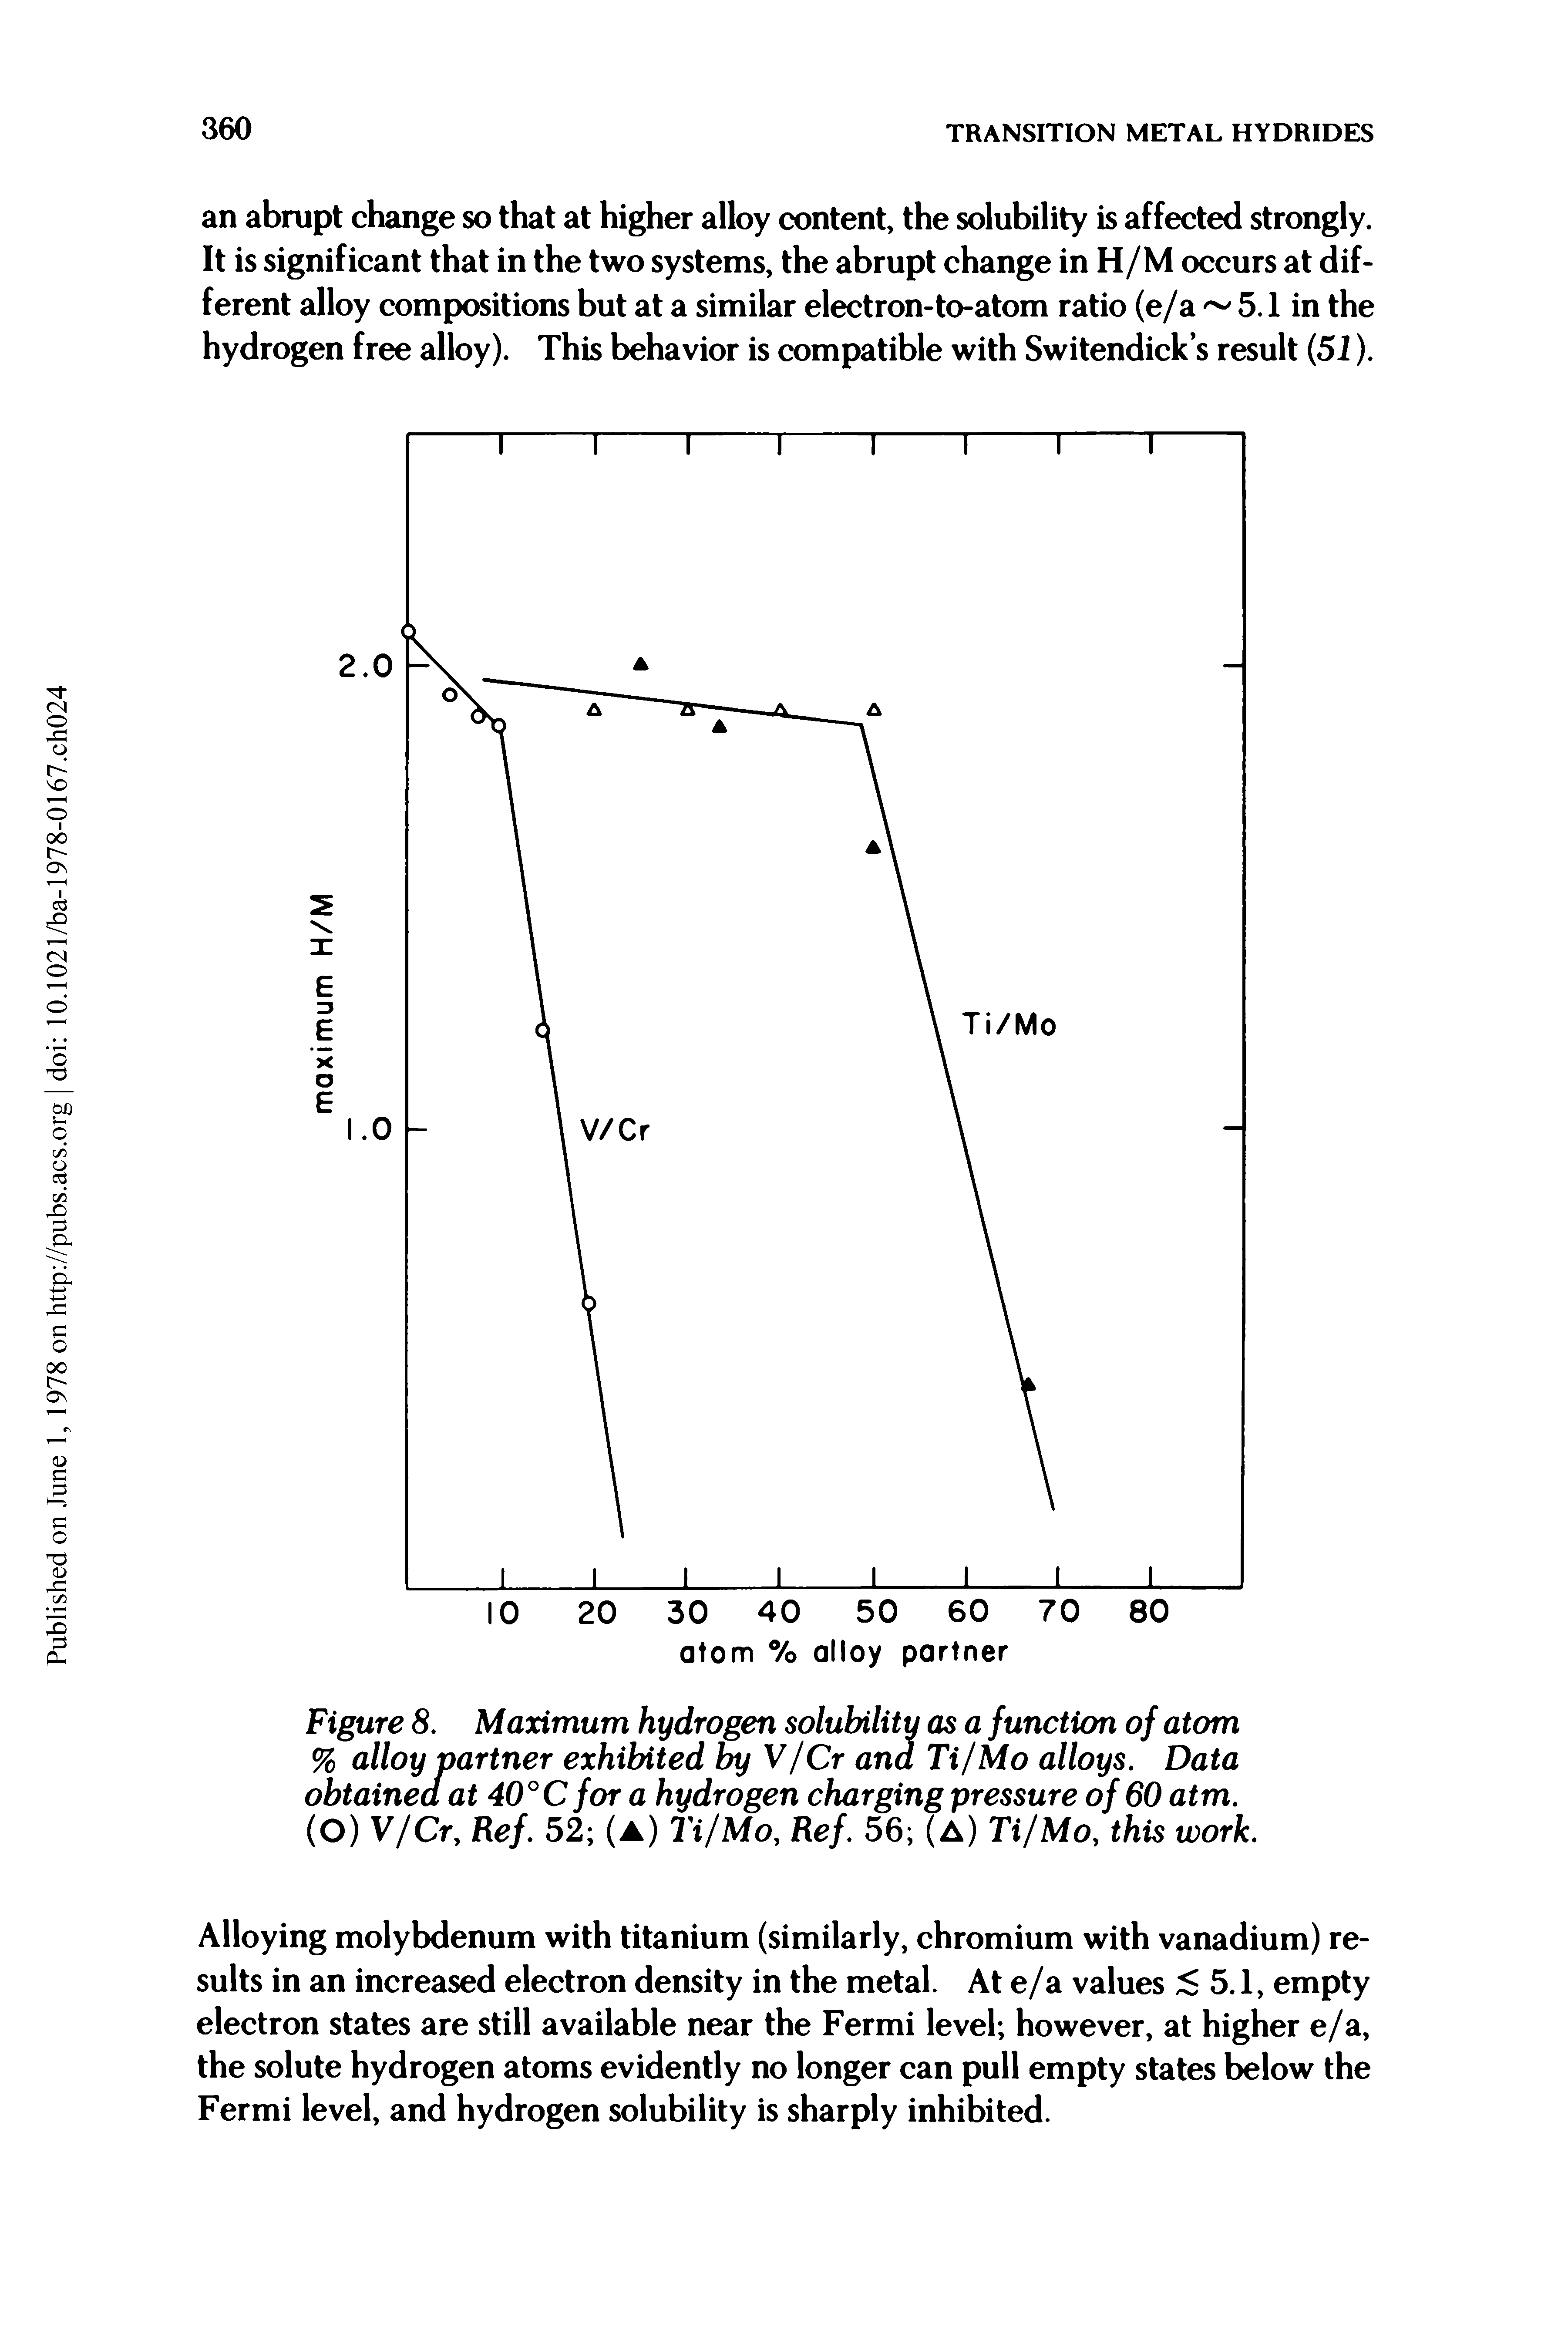 Figure 8. Maximum hydrogen solubility as a function of atom % alloy partner exhibited by V/Cr and Ti/Mo alloys. Data obtained at 40°C for a hydrogen charging pressure of 60 atm. (O) V/Cr, Ref. 52 (a) Ti/Mo, Ref. 56 (A) Ti/Mo, this work.